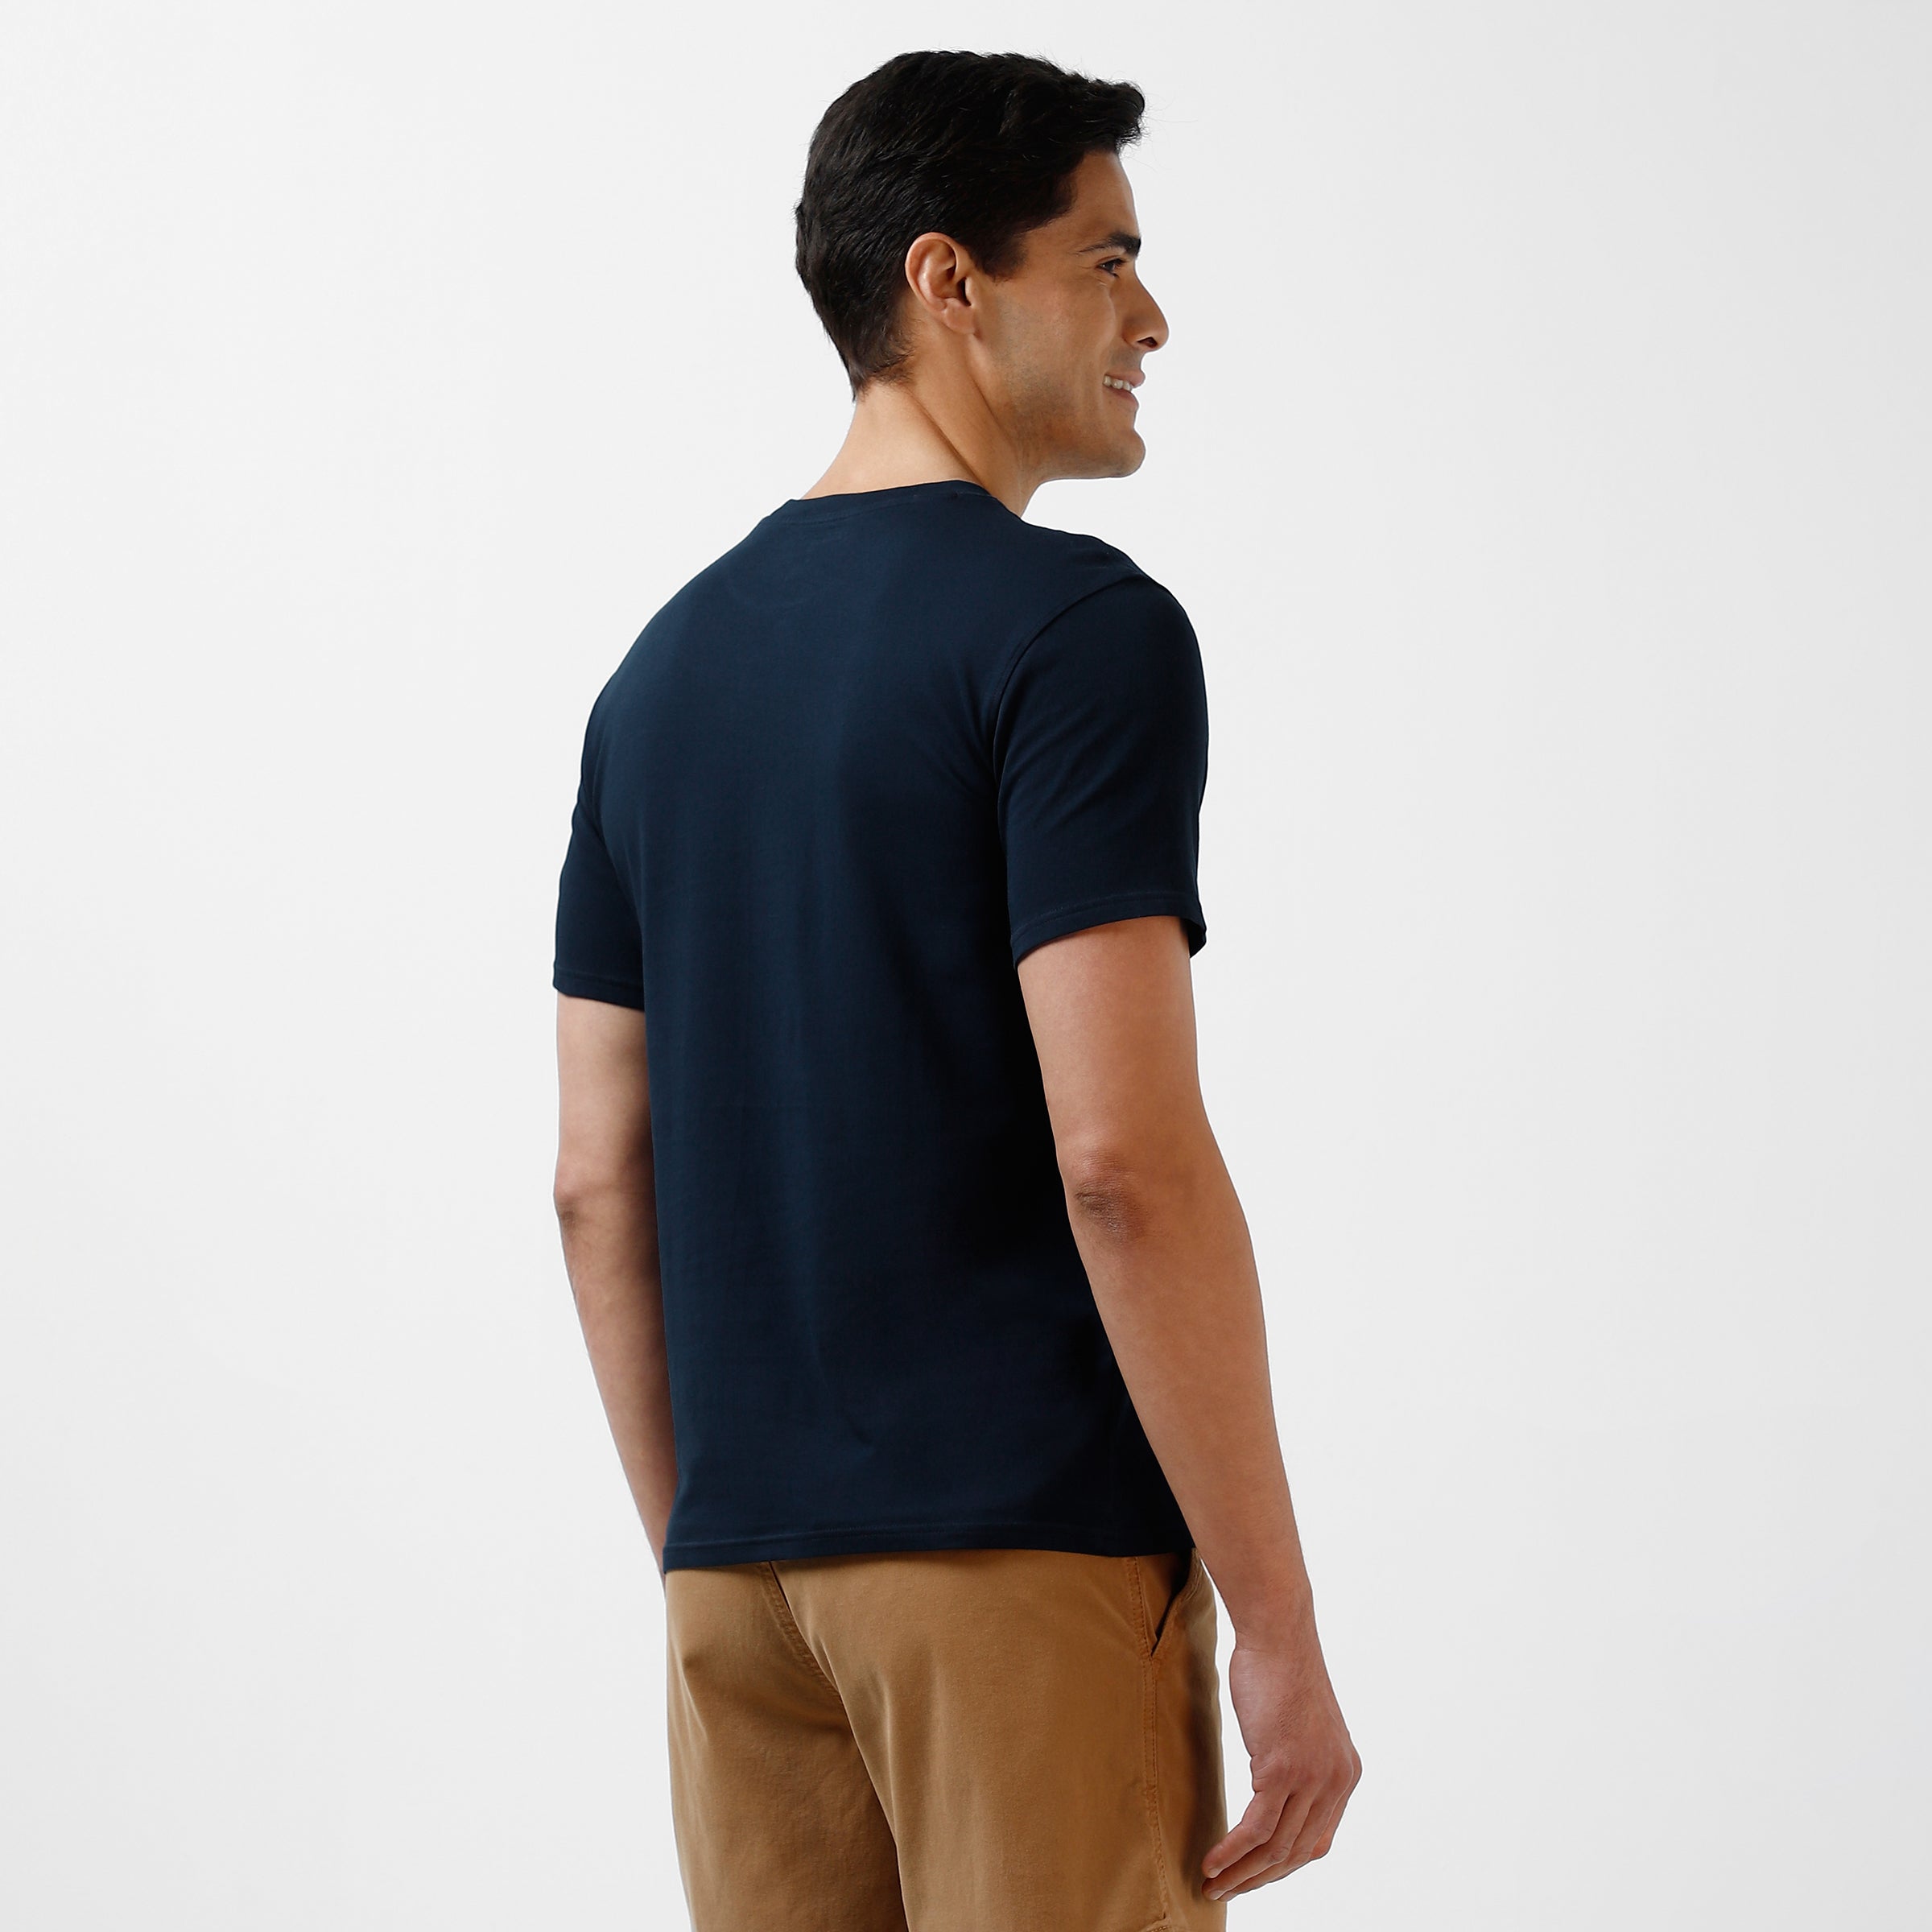 Natural Dye Tee Navy back right on model